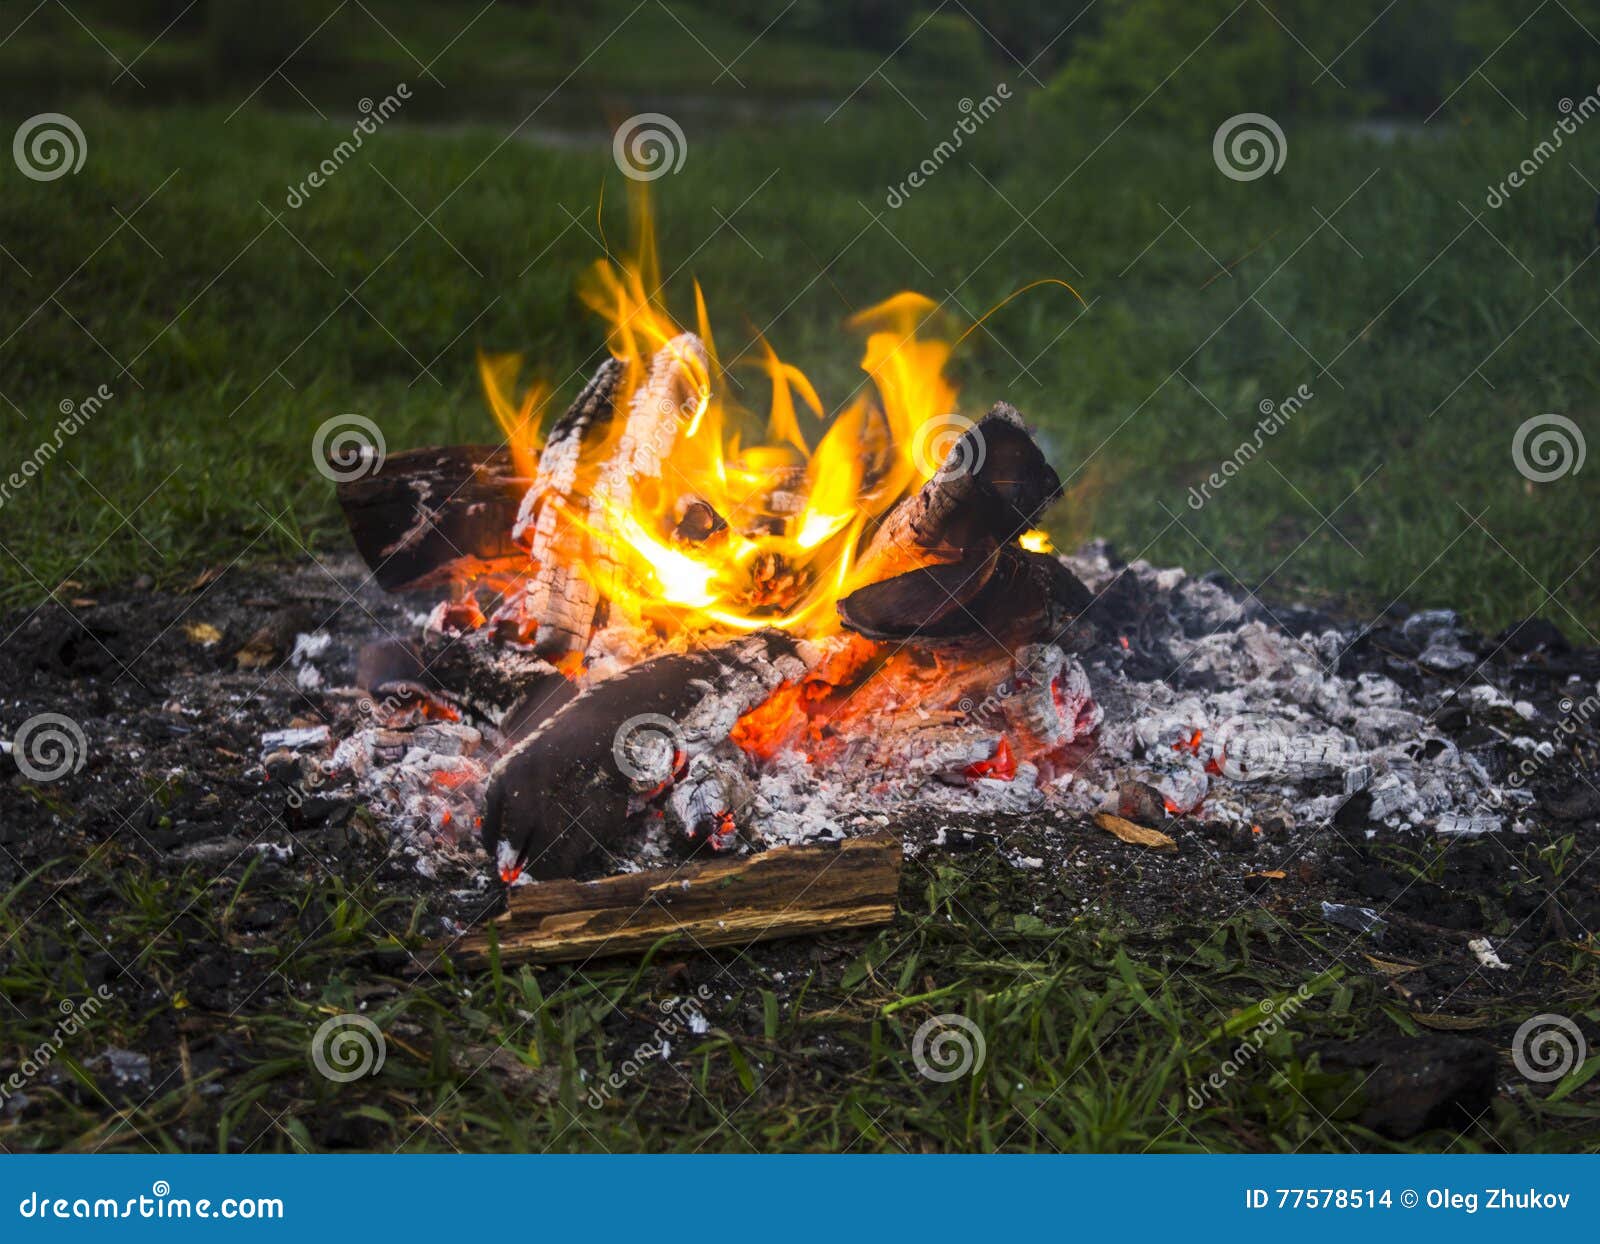 Fireplace in Forest at Dusk Stock Photo - Image of burning, firewood ...